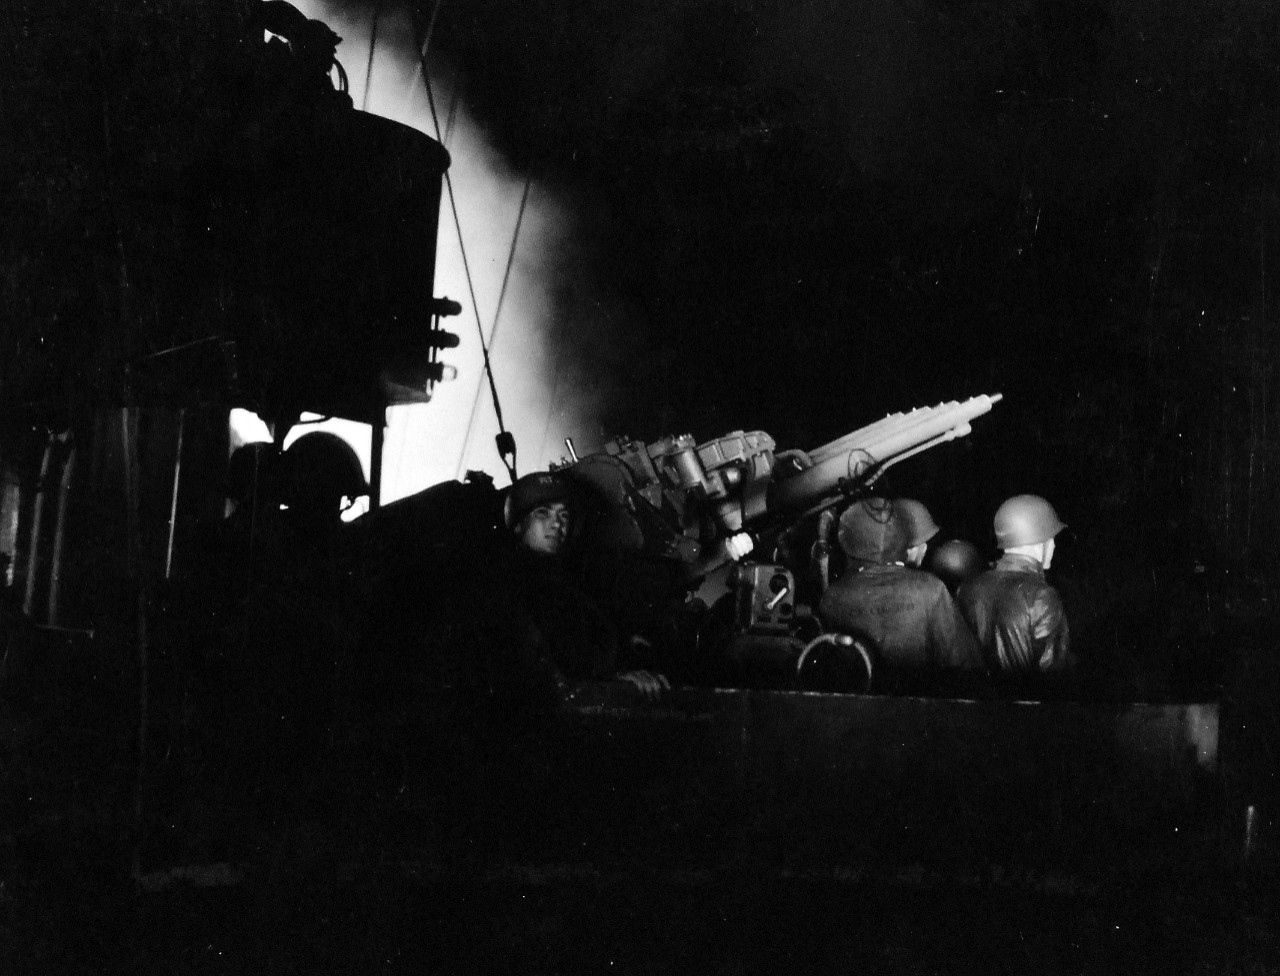 80-G-54554:  Battle of Kula Gulf, July 5-6, 1943.   Aboard USS Honolulu (CL- 48).  Shown is the night gunnery by the 1.1 gun crew on superstructure lit by gunfire.    Photograph, July 1943.   Official U.S. Navy photograph, now in the collections of the National Archives.   (2016/07/19).